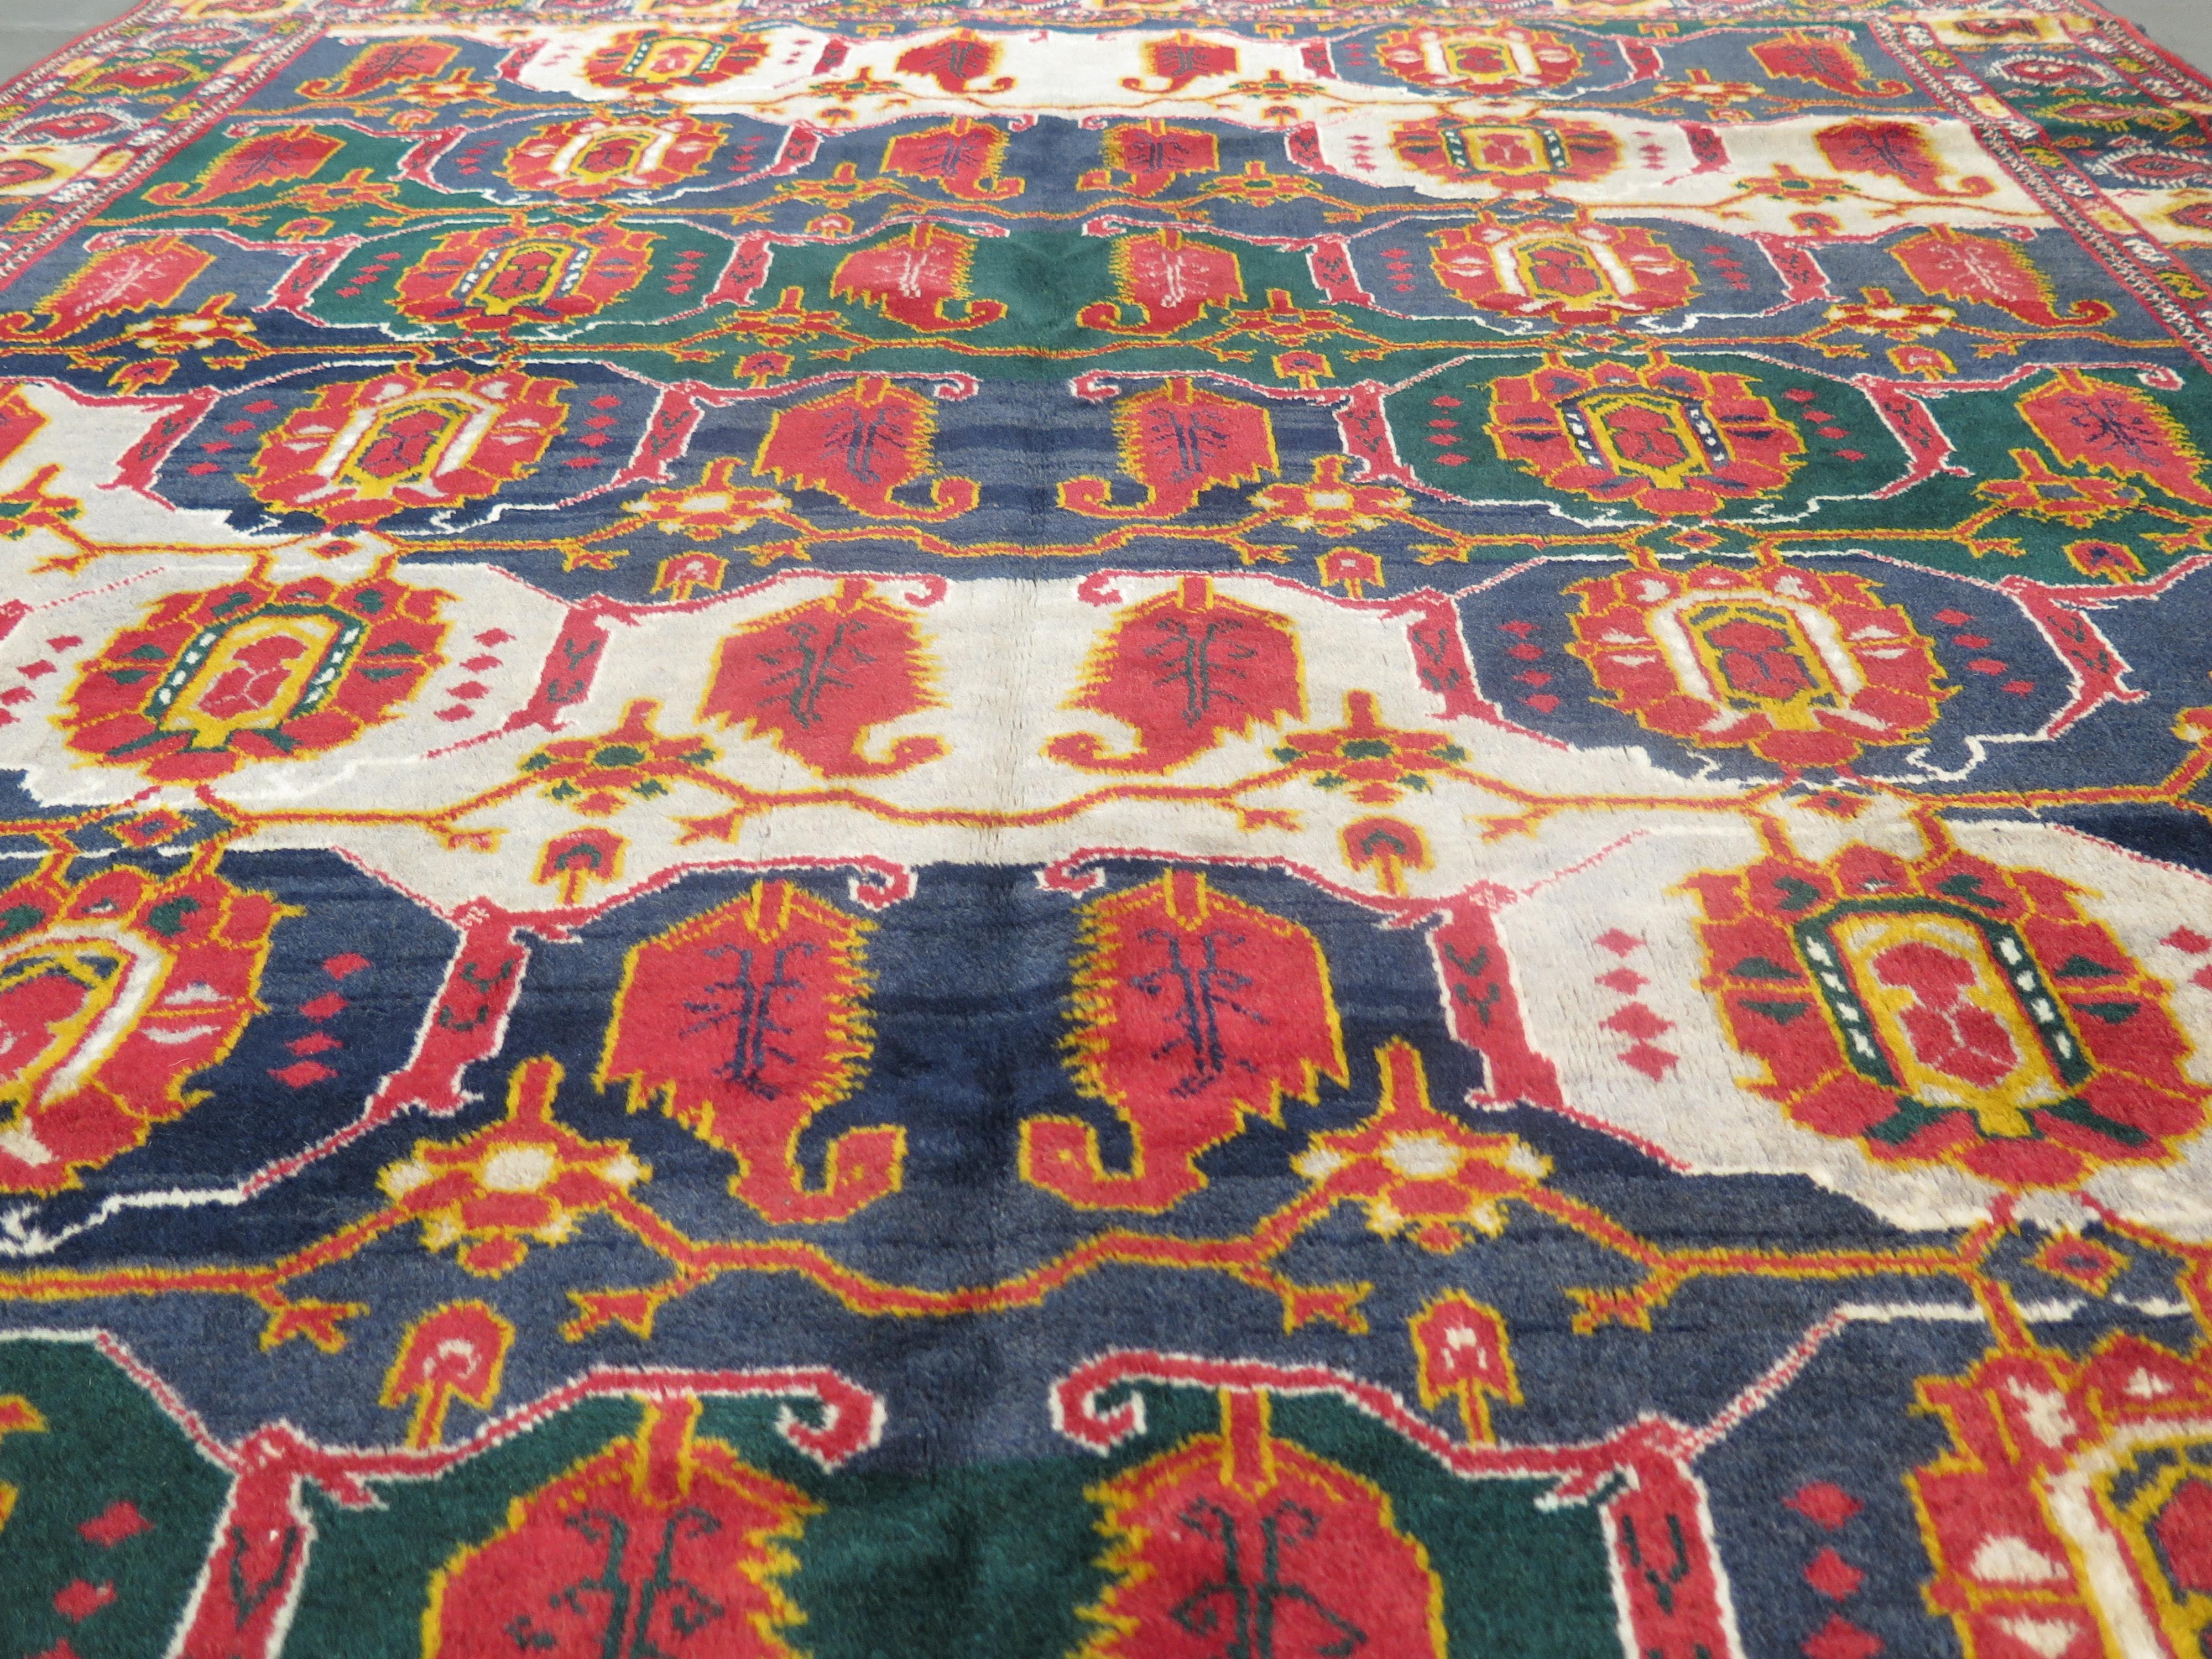 Beshir rugs are woven by the Beshir tribesmen of Turkmenistan and are known for their distinctive weaving style in a region where rugs are predominantly recognised by their 'elephant foot' patterns in deep reds and dark blues.

This striking